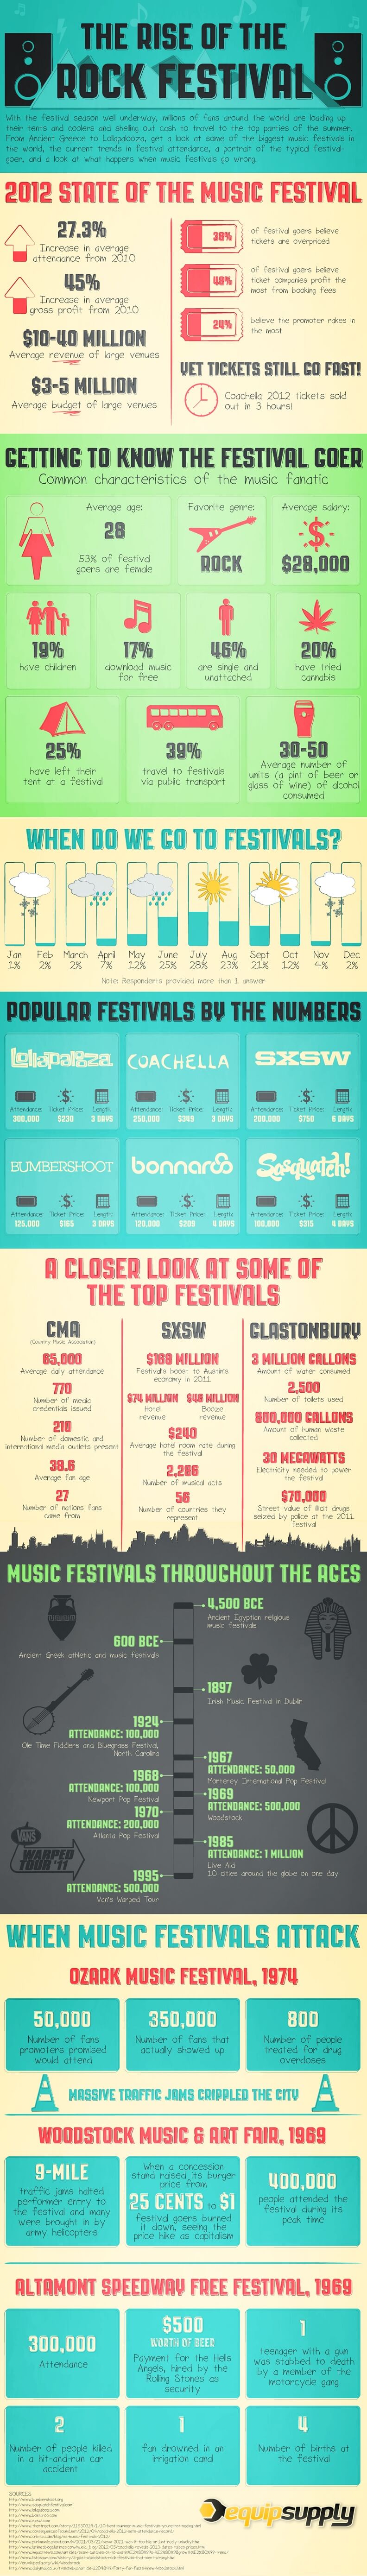 The Rise of Rock Music Festivals